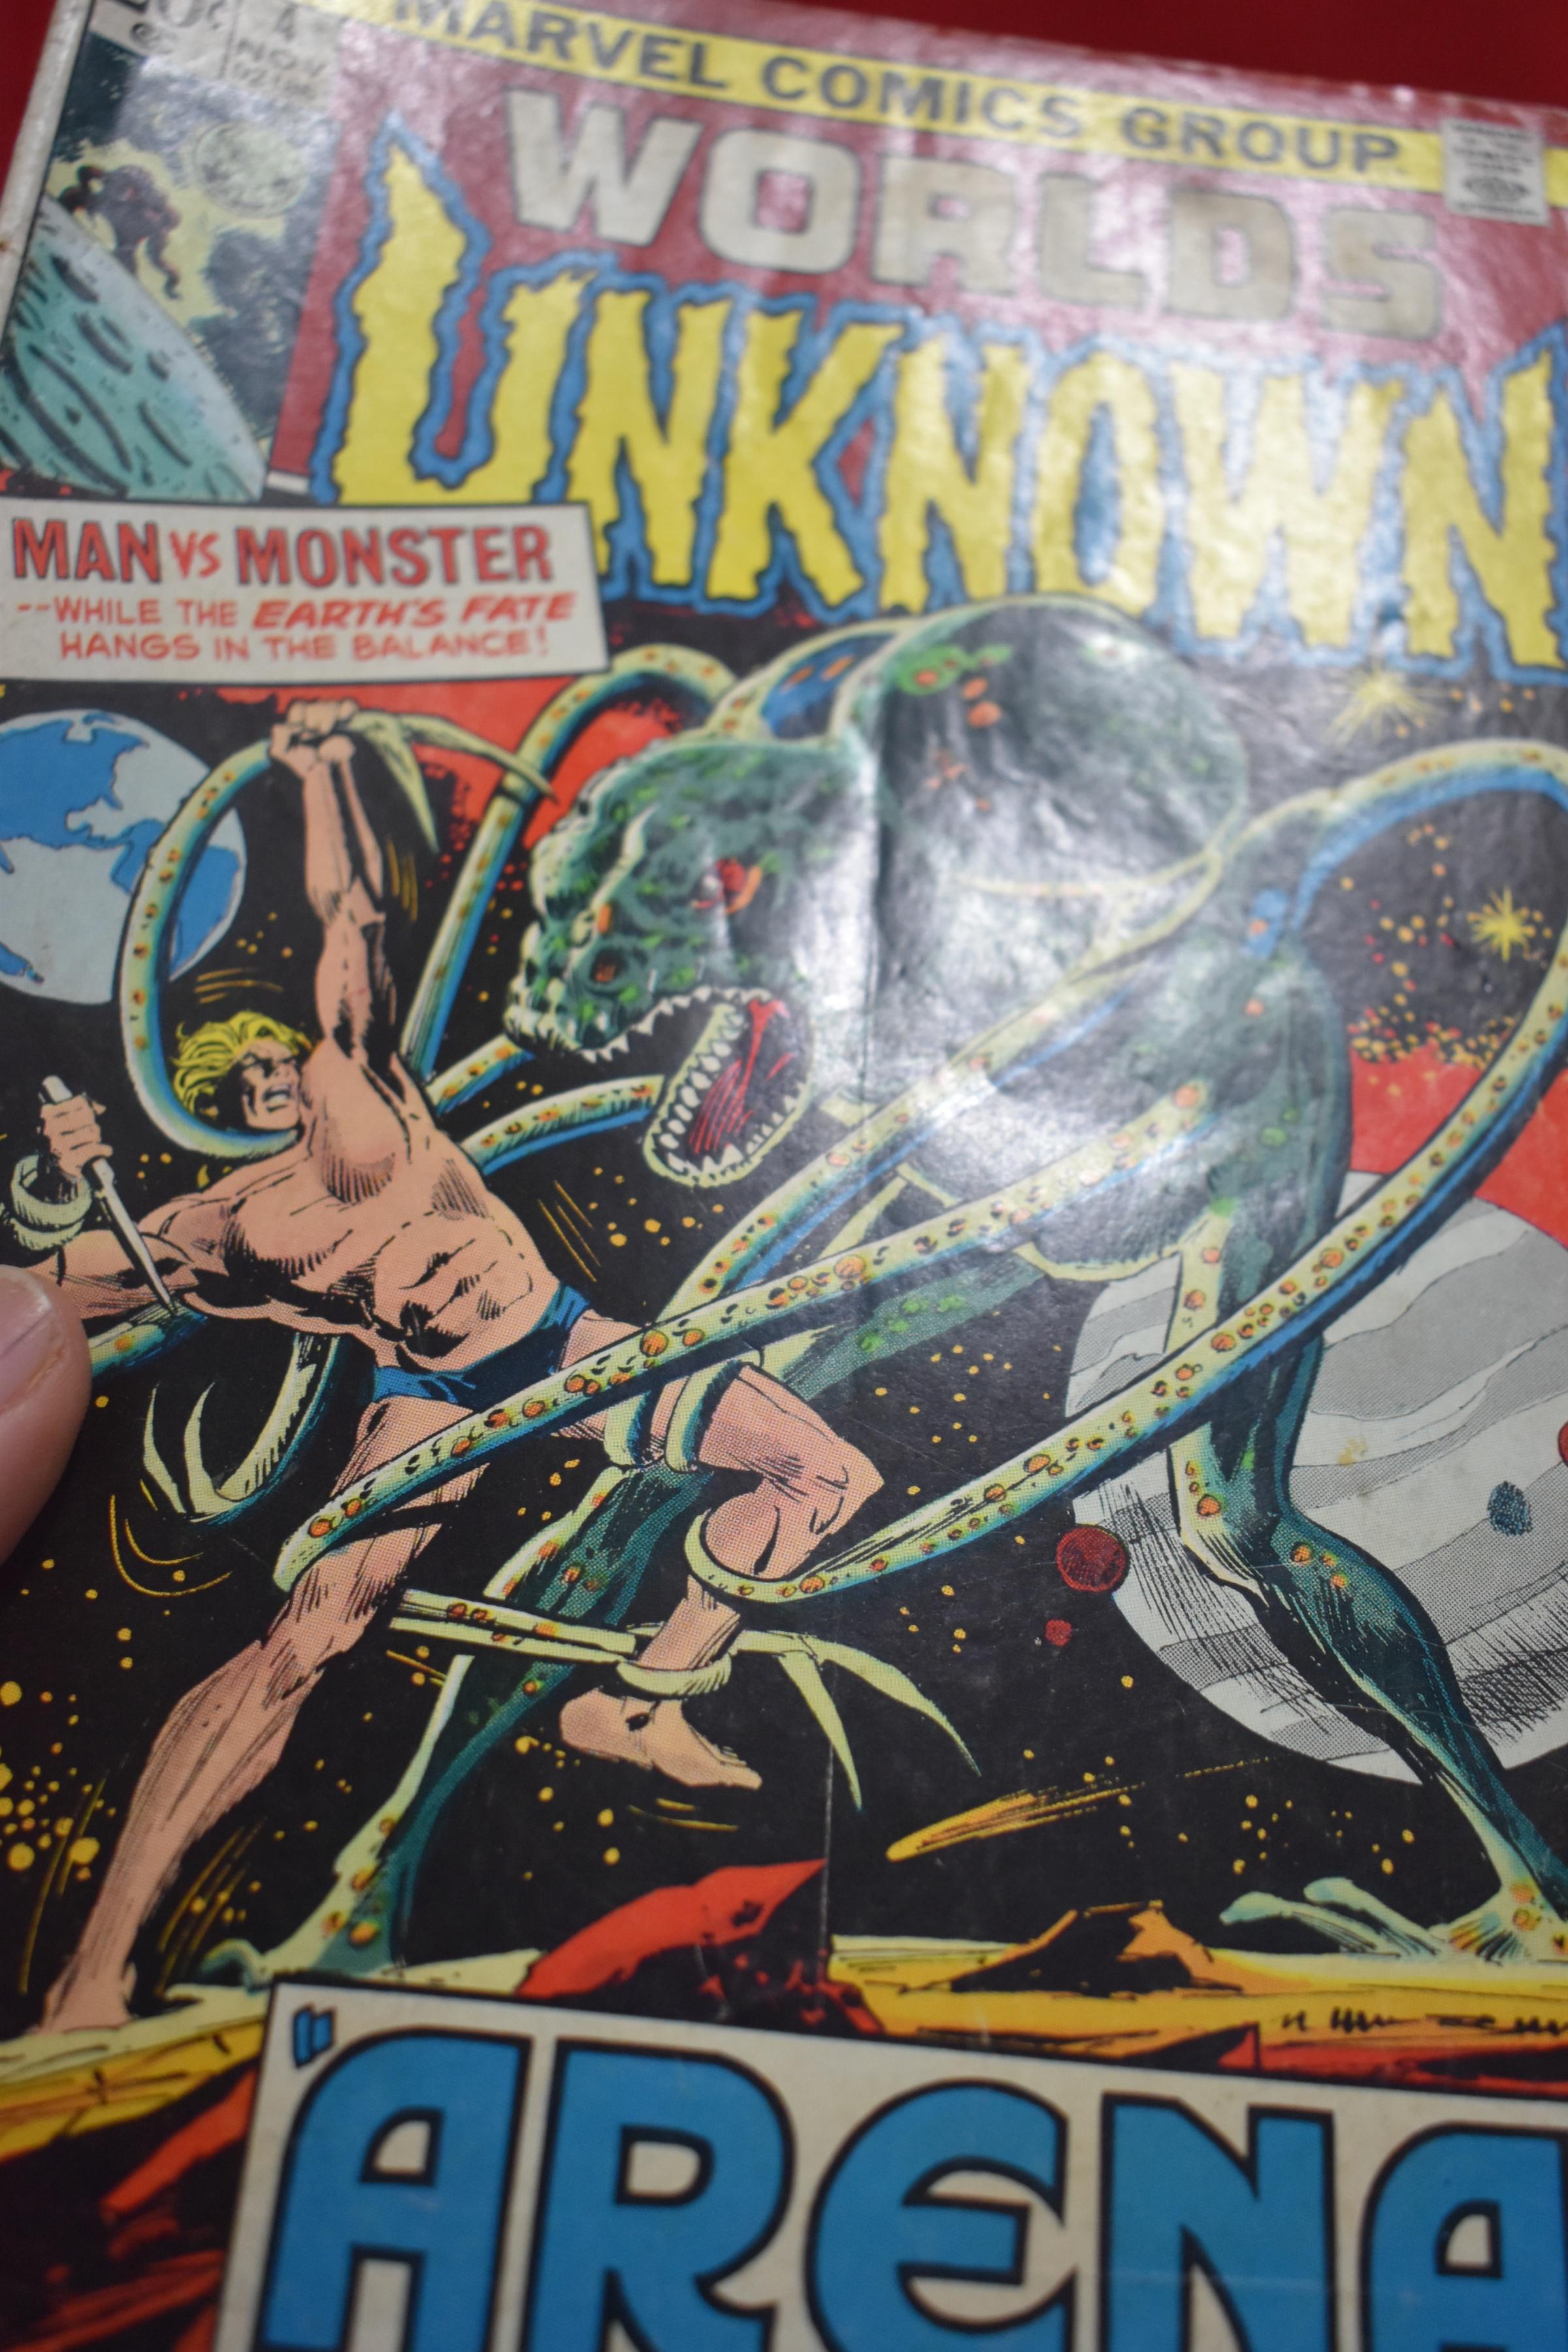 WORLD UNKNOWN #4 | MAN VS MONSTER! | DICK GIORDANO - 1973 | *TOP STAPLE - CREASING - WEAR - SEE PICS